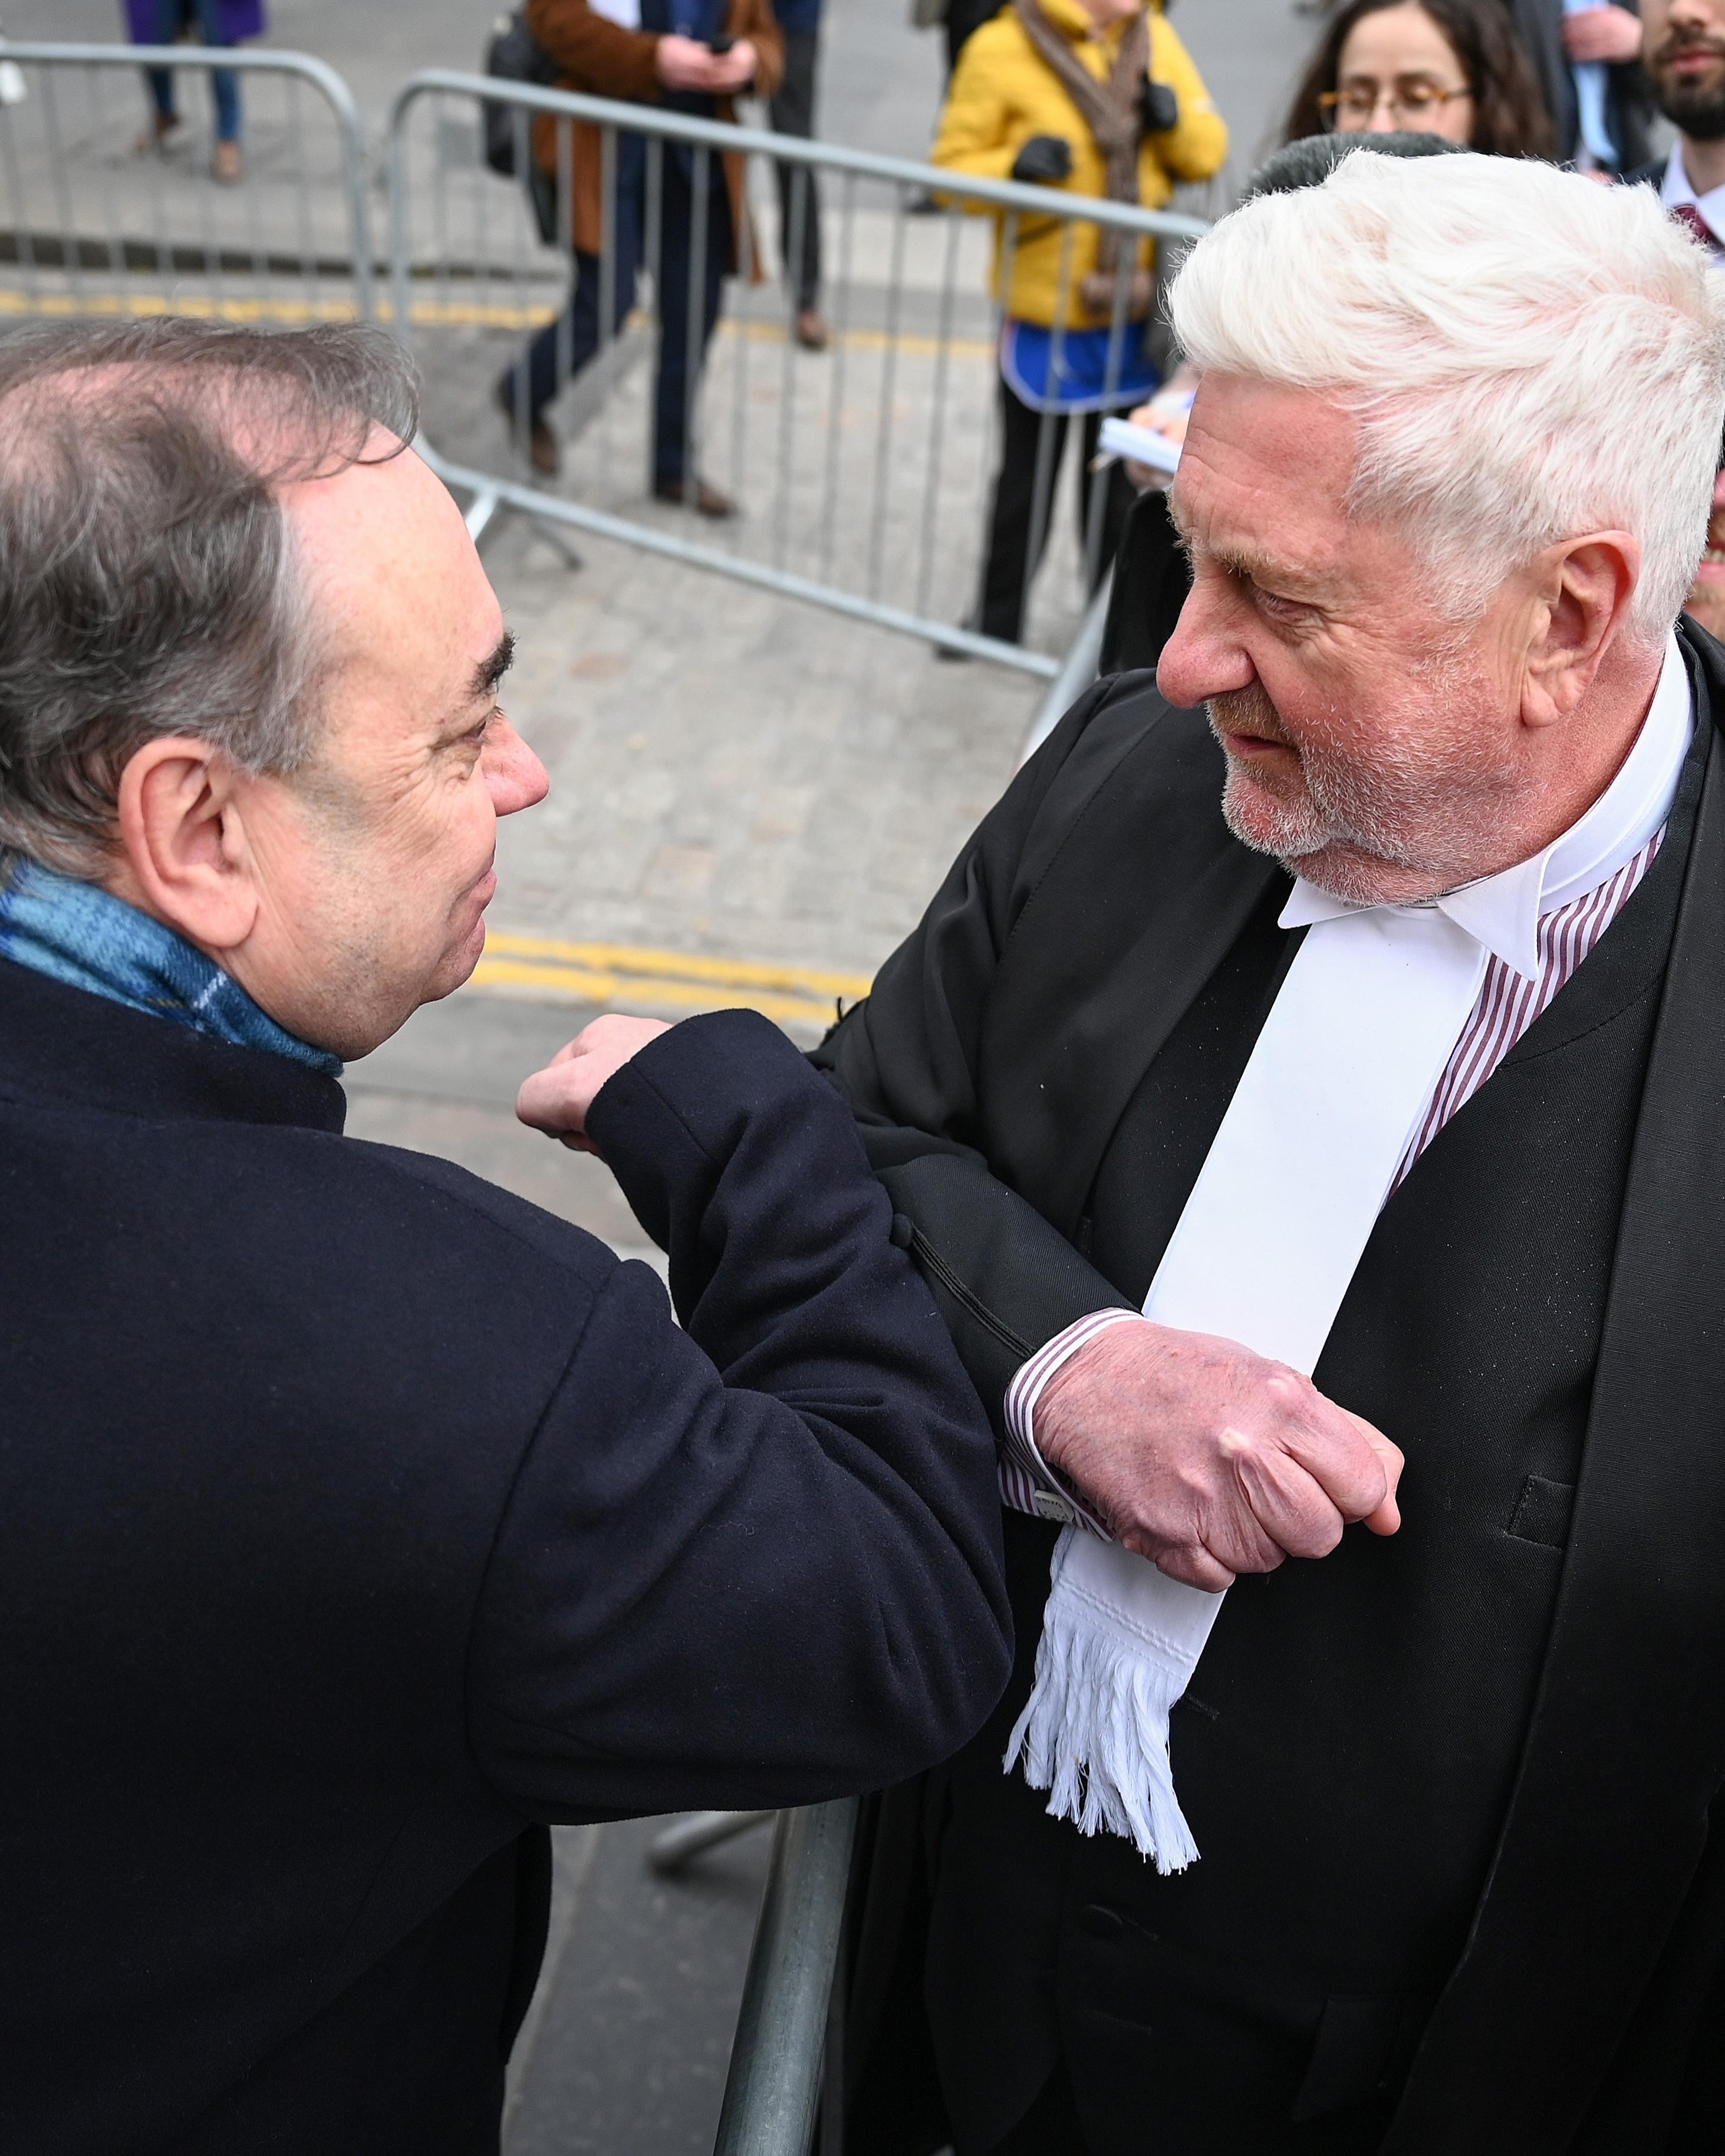 Alex Salmond, the former first minister, with his lawyer Gordon Jackson after Salmond was cleared of sexual assault charges